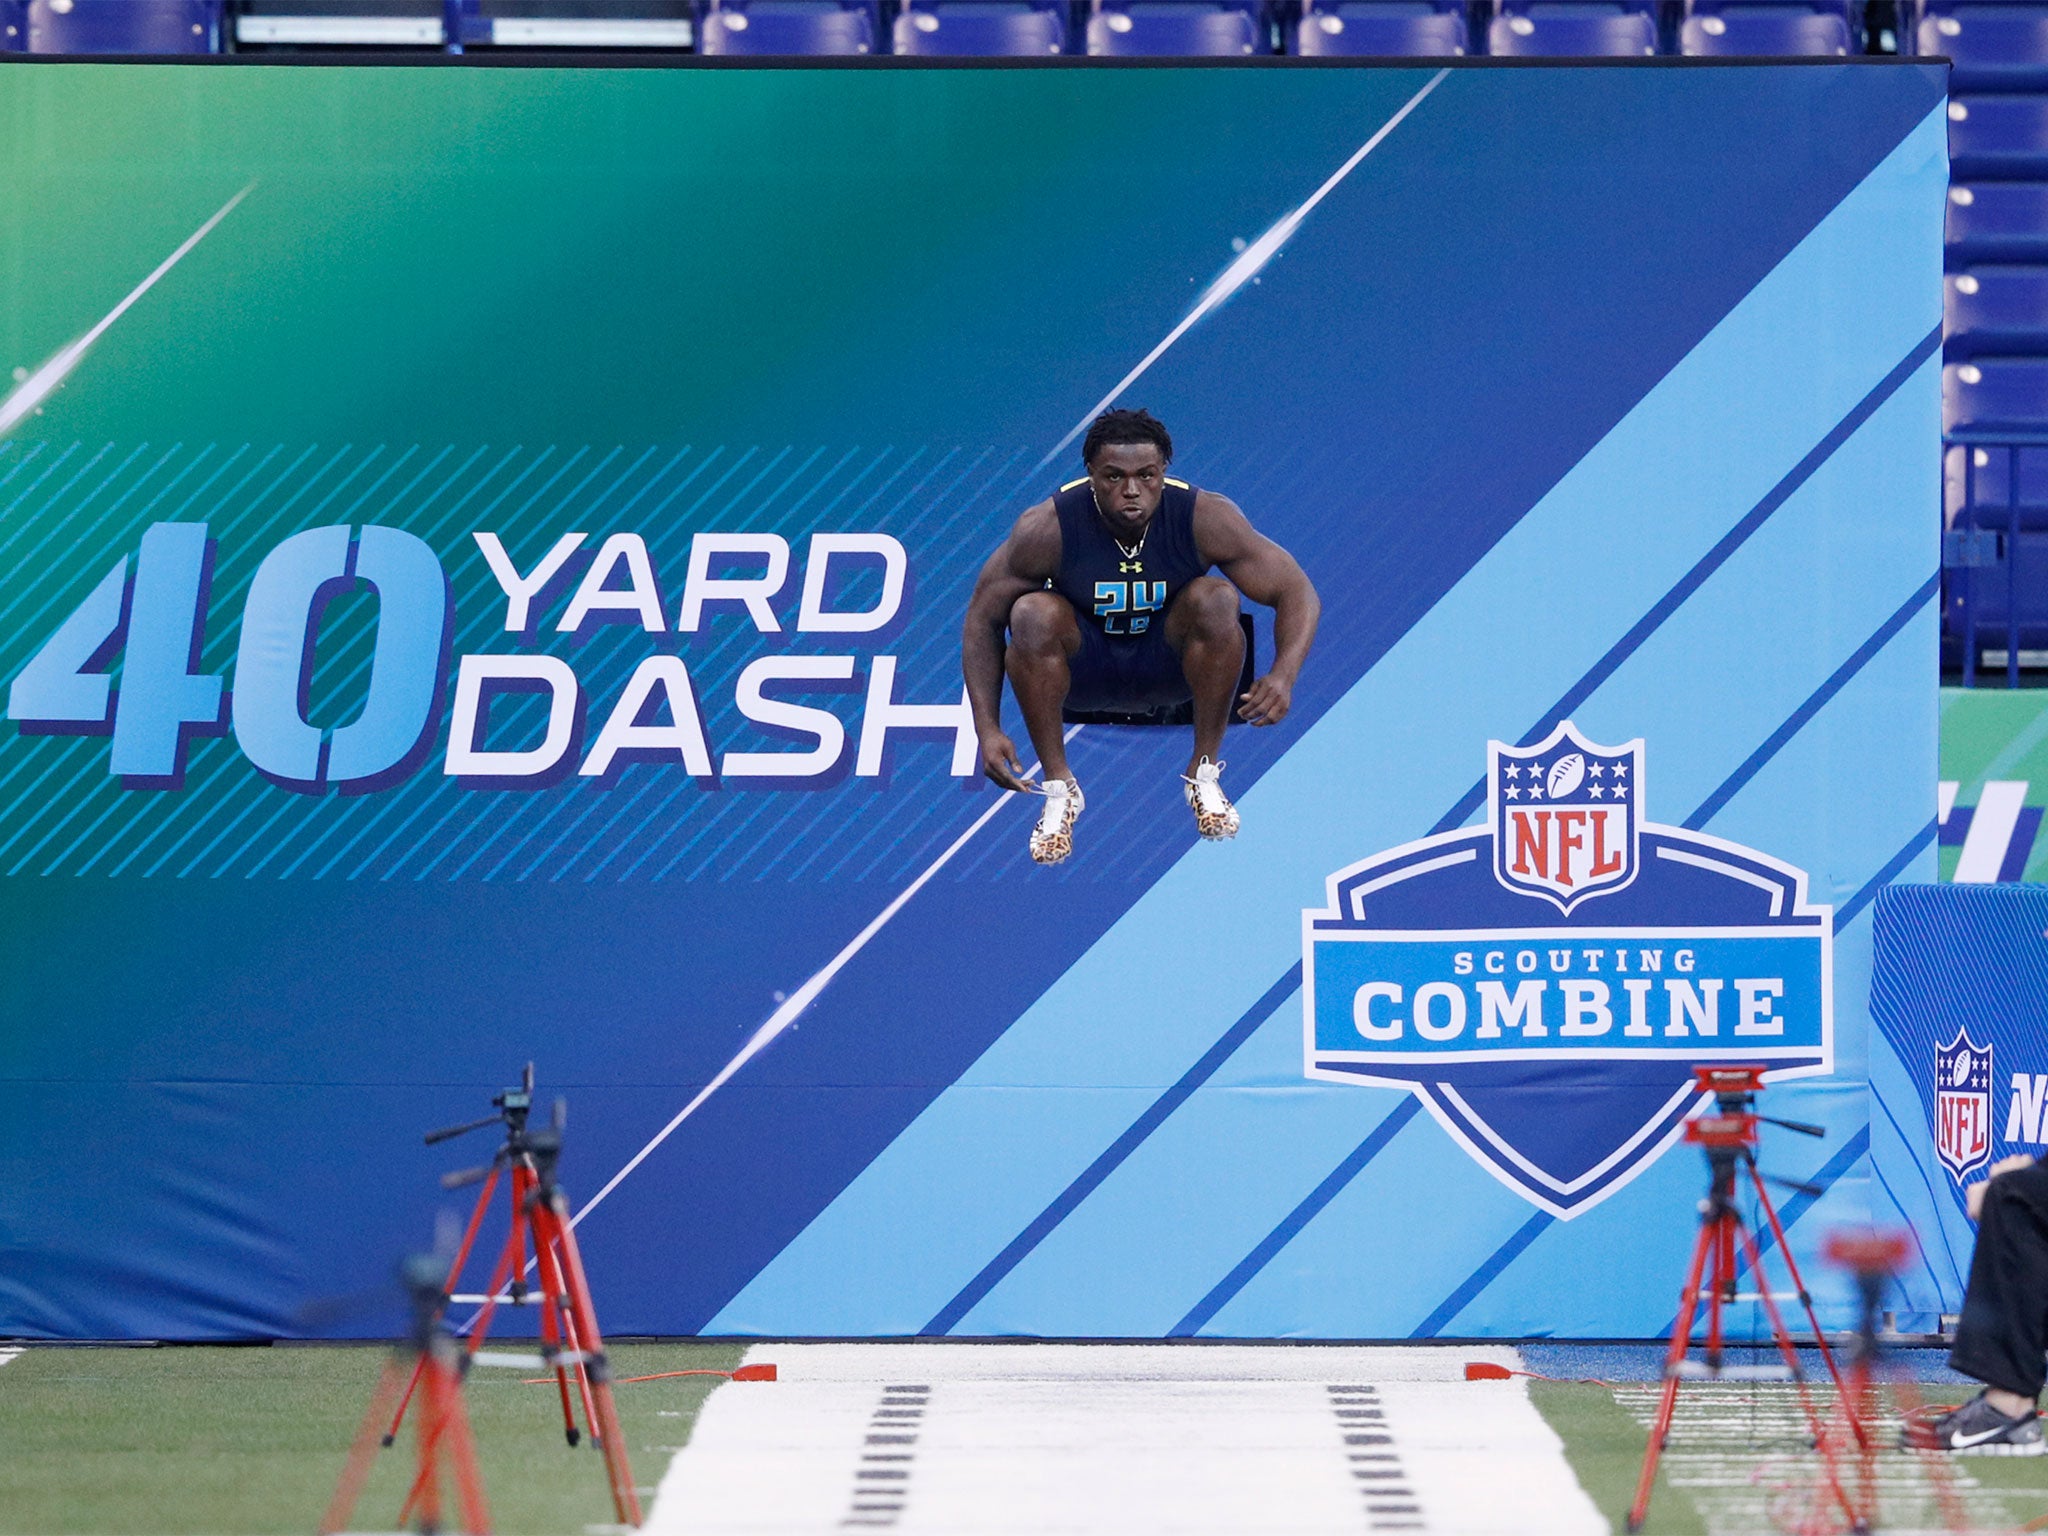 The NFL Combine is a chance for prospects to show off their skills and athleticism